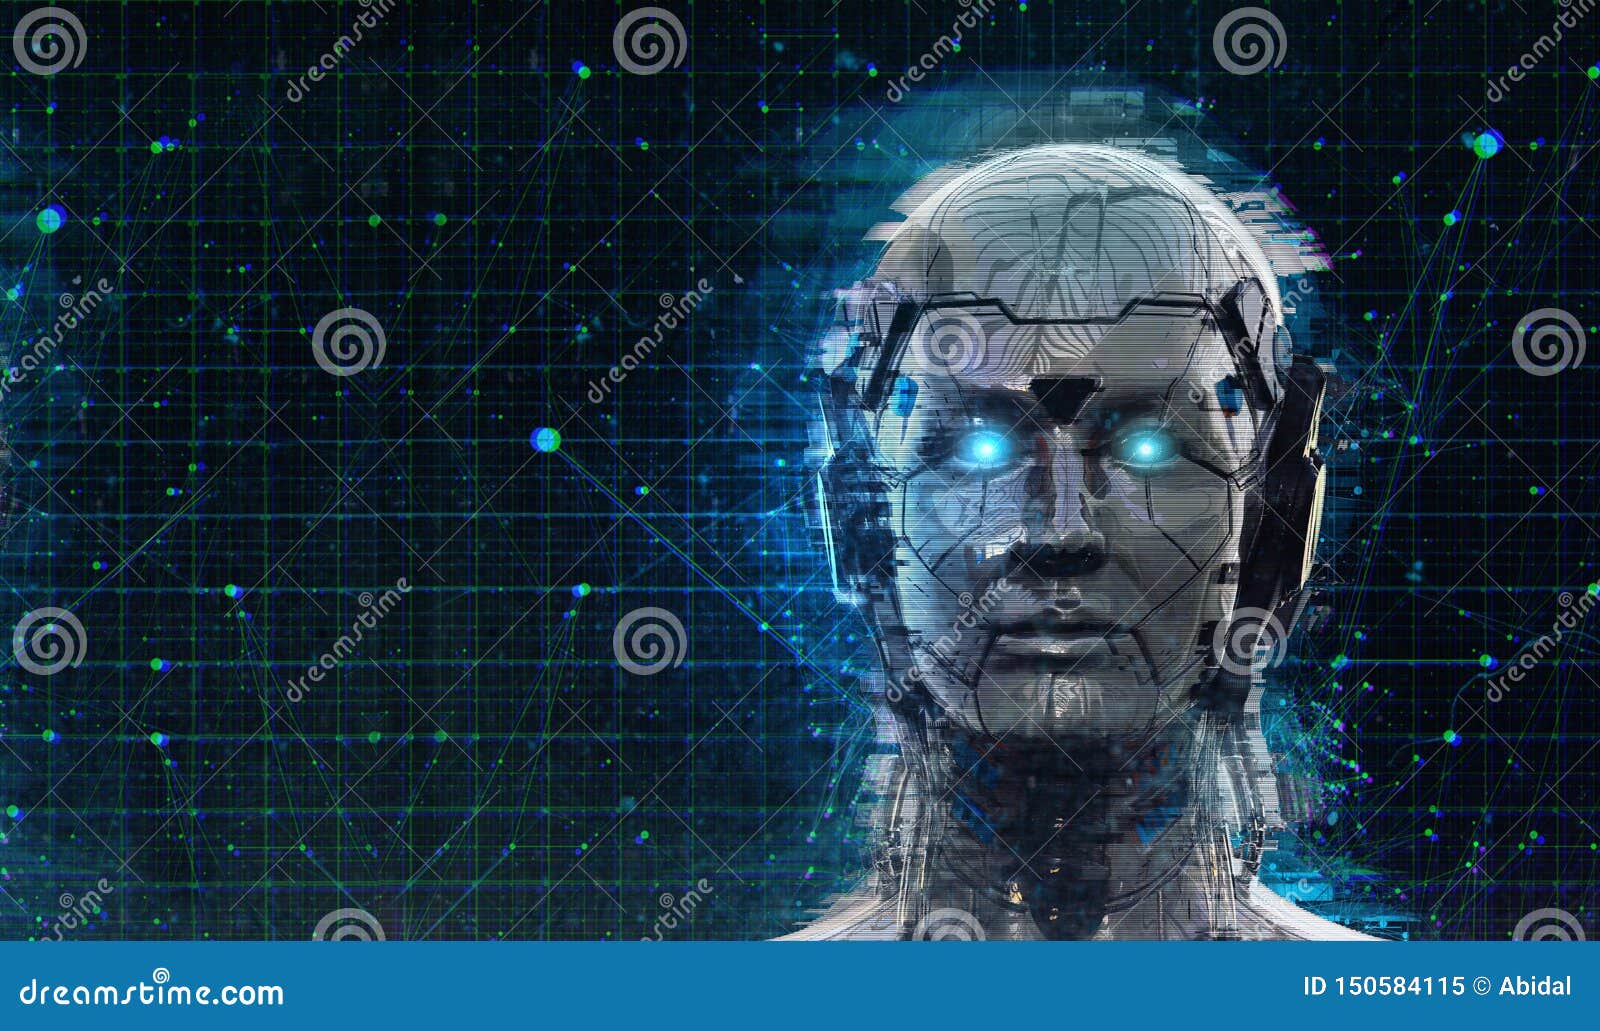 Technology Robot Sci Woman Cyborg Android Background Humanoid Artificial  Intelligence Stock Photo by abidal 275369004